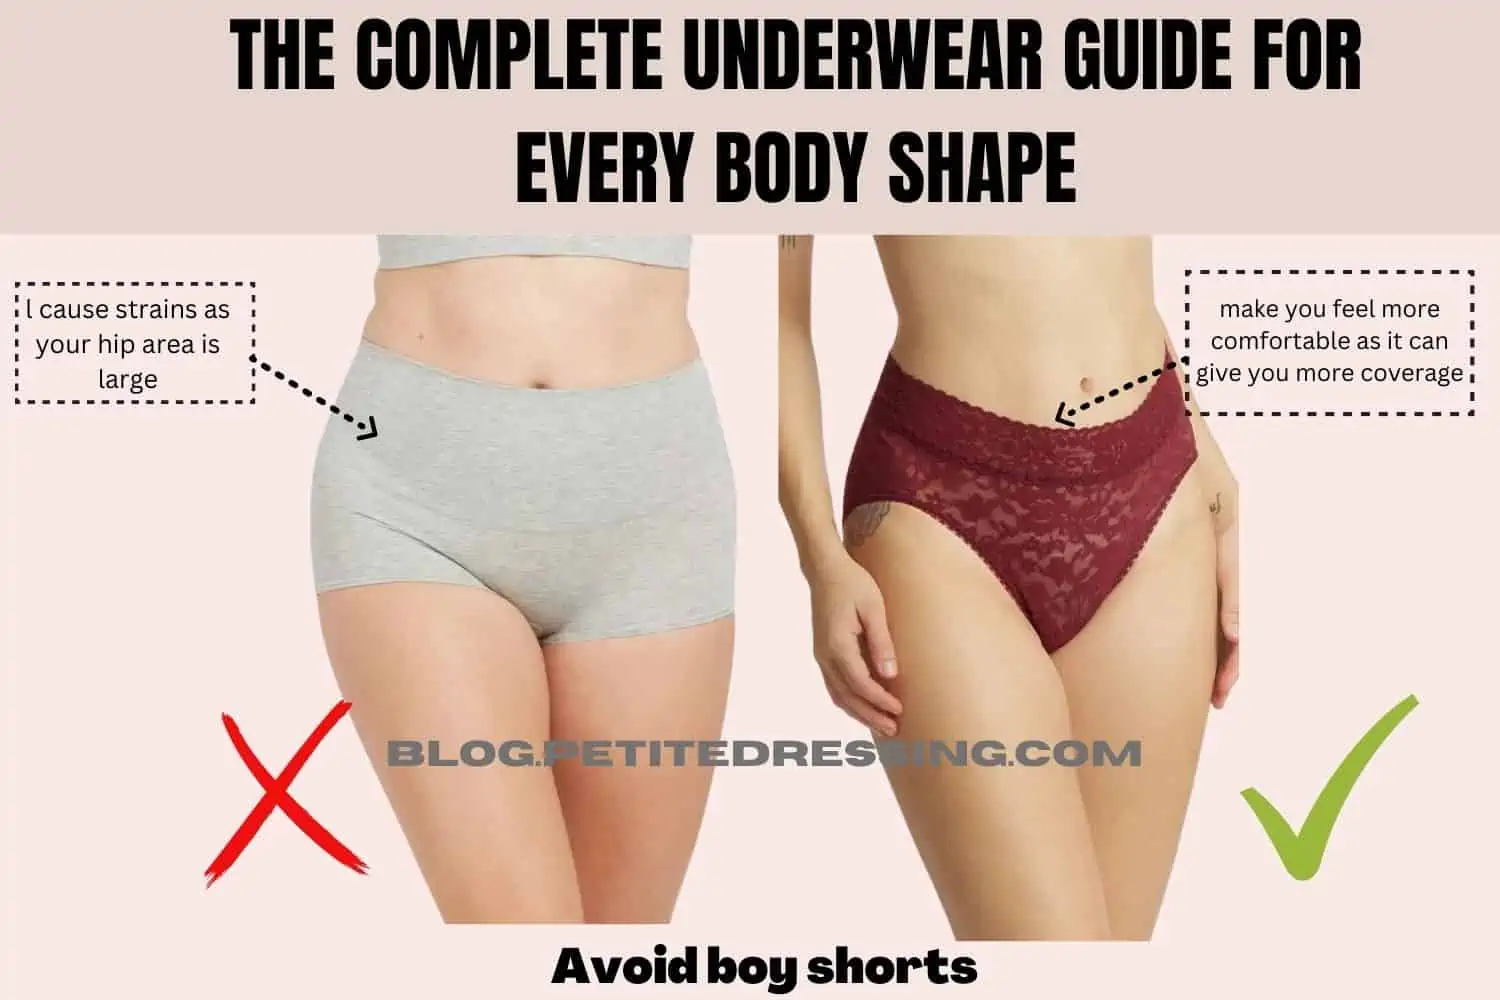 Romantic Body Type Lingerie And Underwear - Womanology